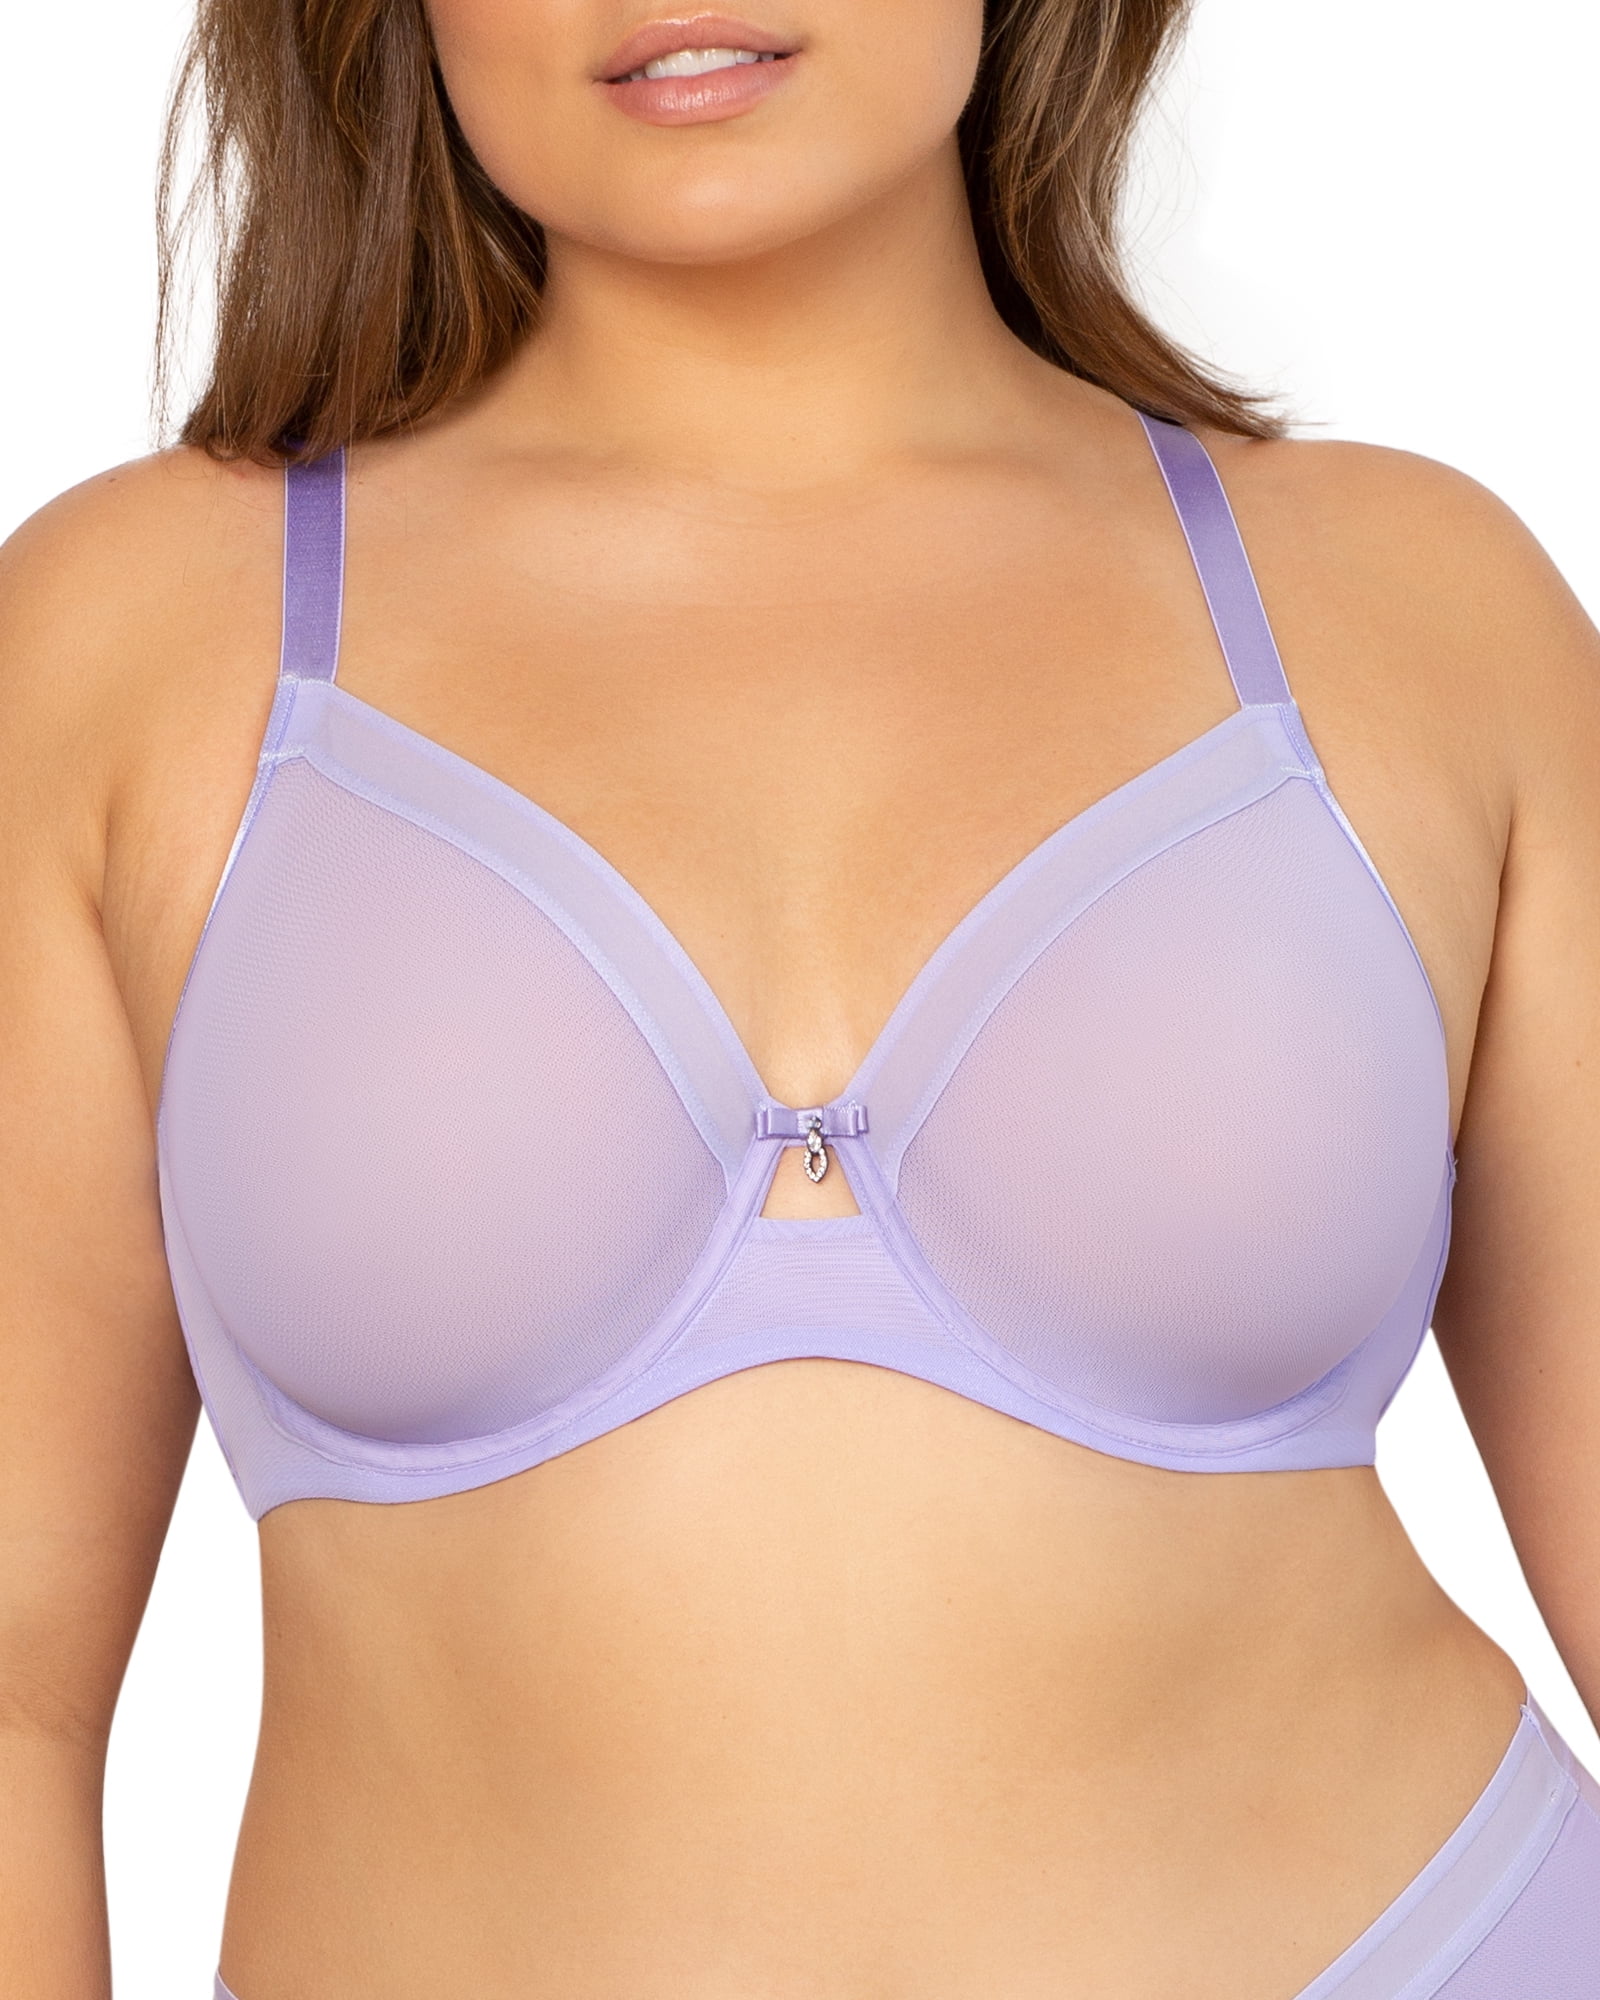 Sheer Mesh Full Coverage Unlined Underwire Bra - Cosmo Pink 